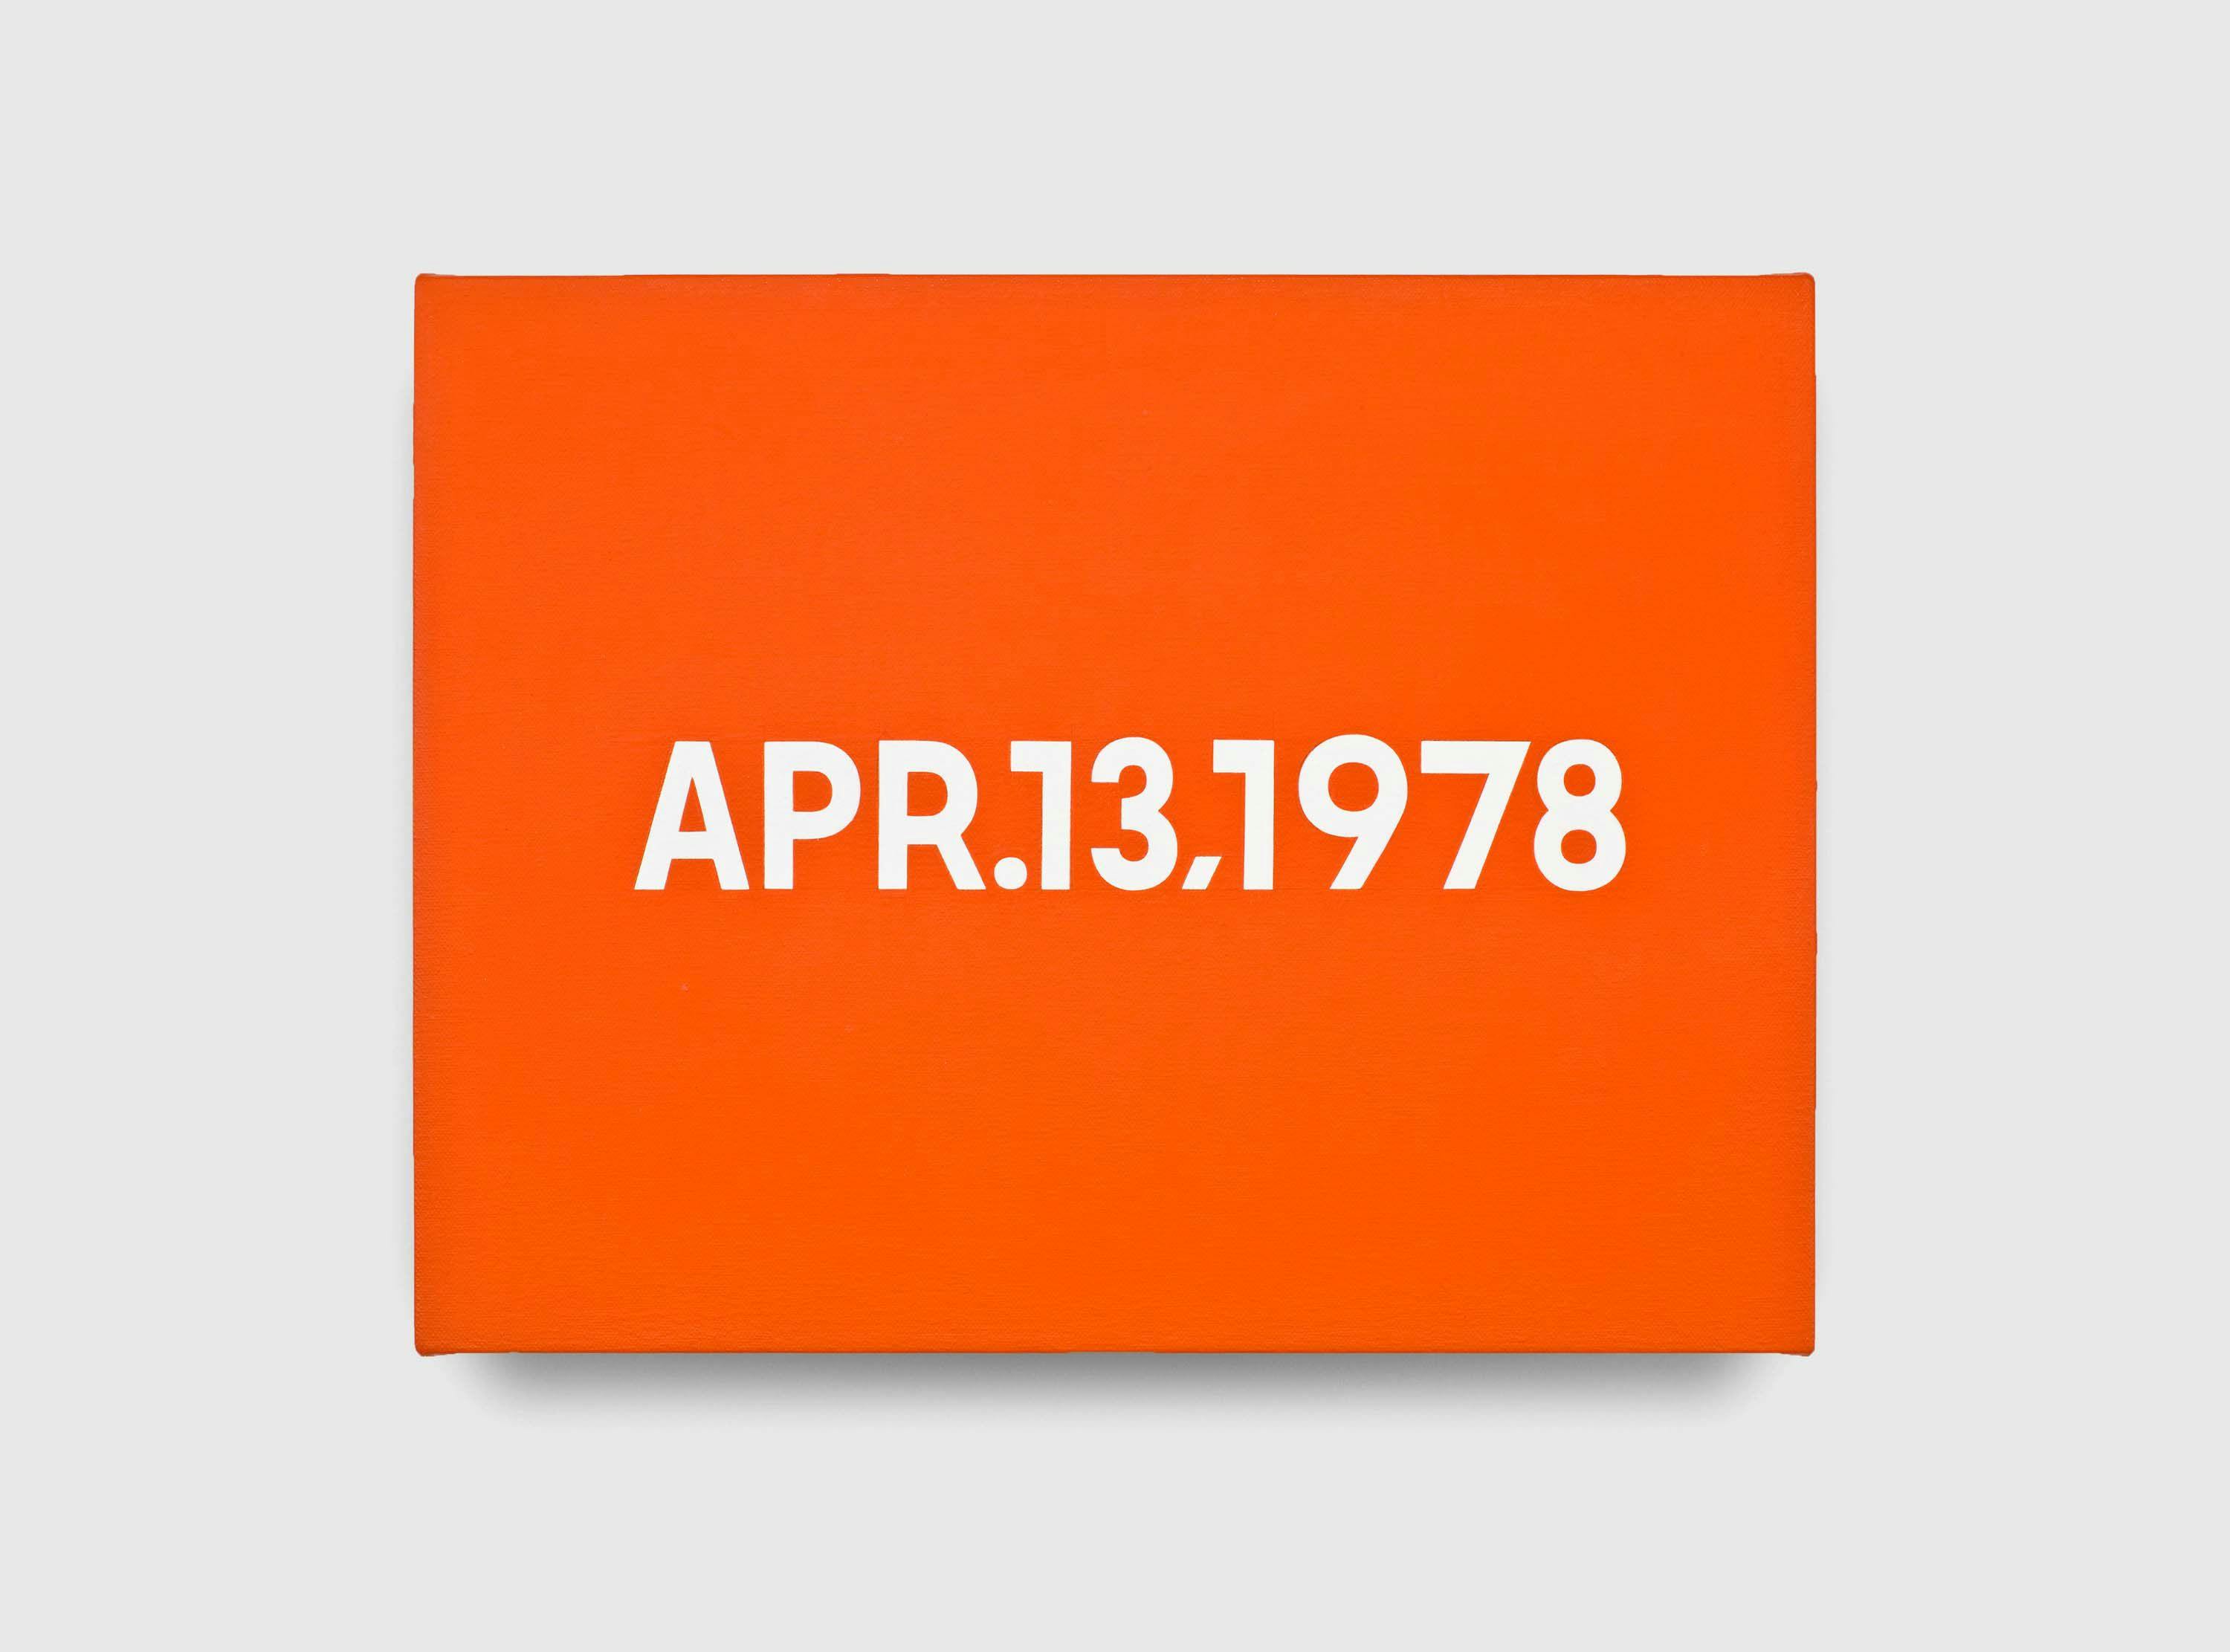 A painting by On Kawara, titled APR. 13, 1978, dated 1978.